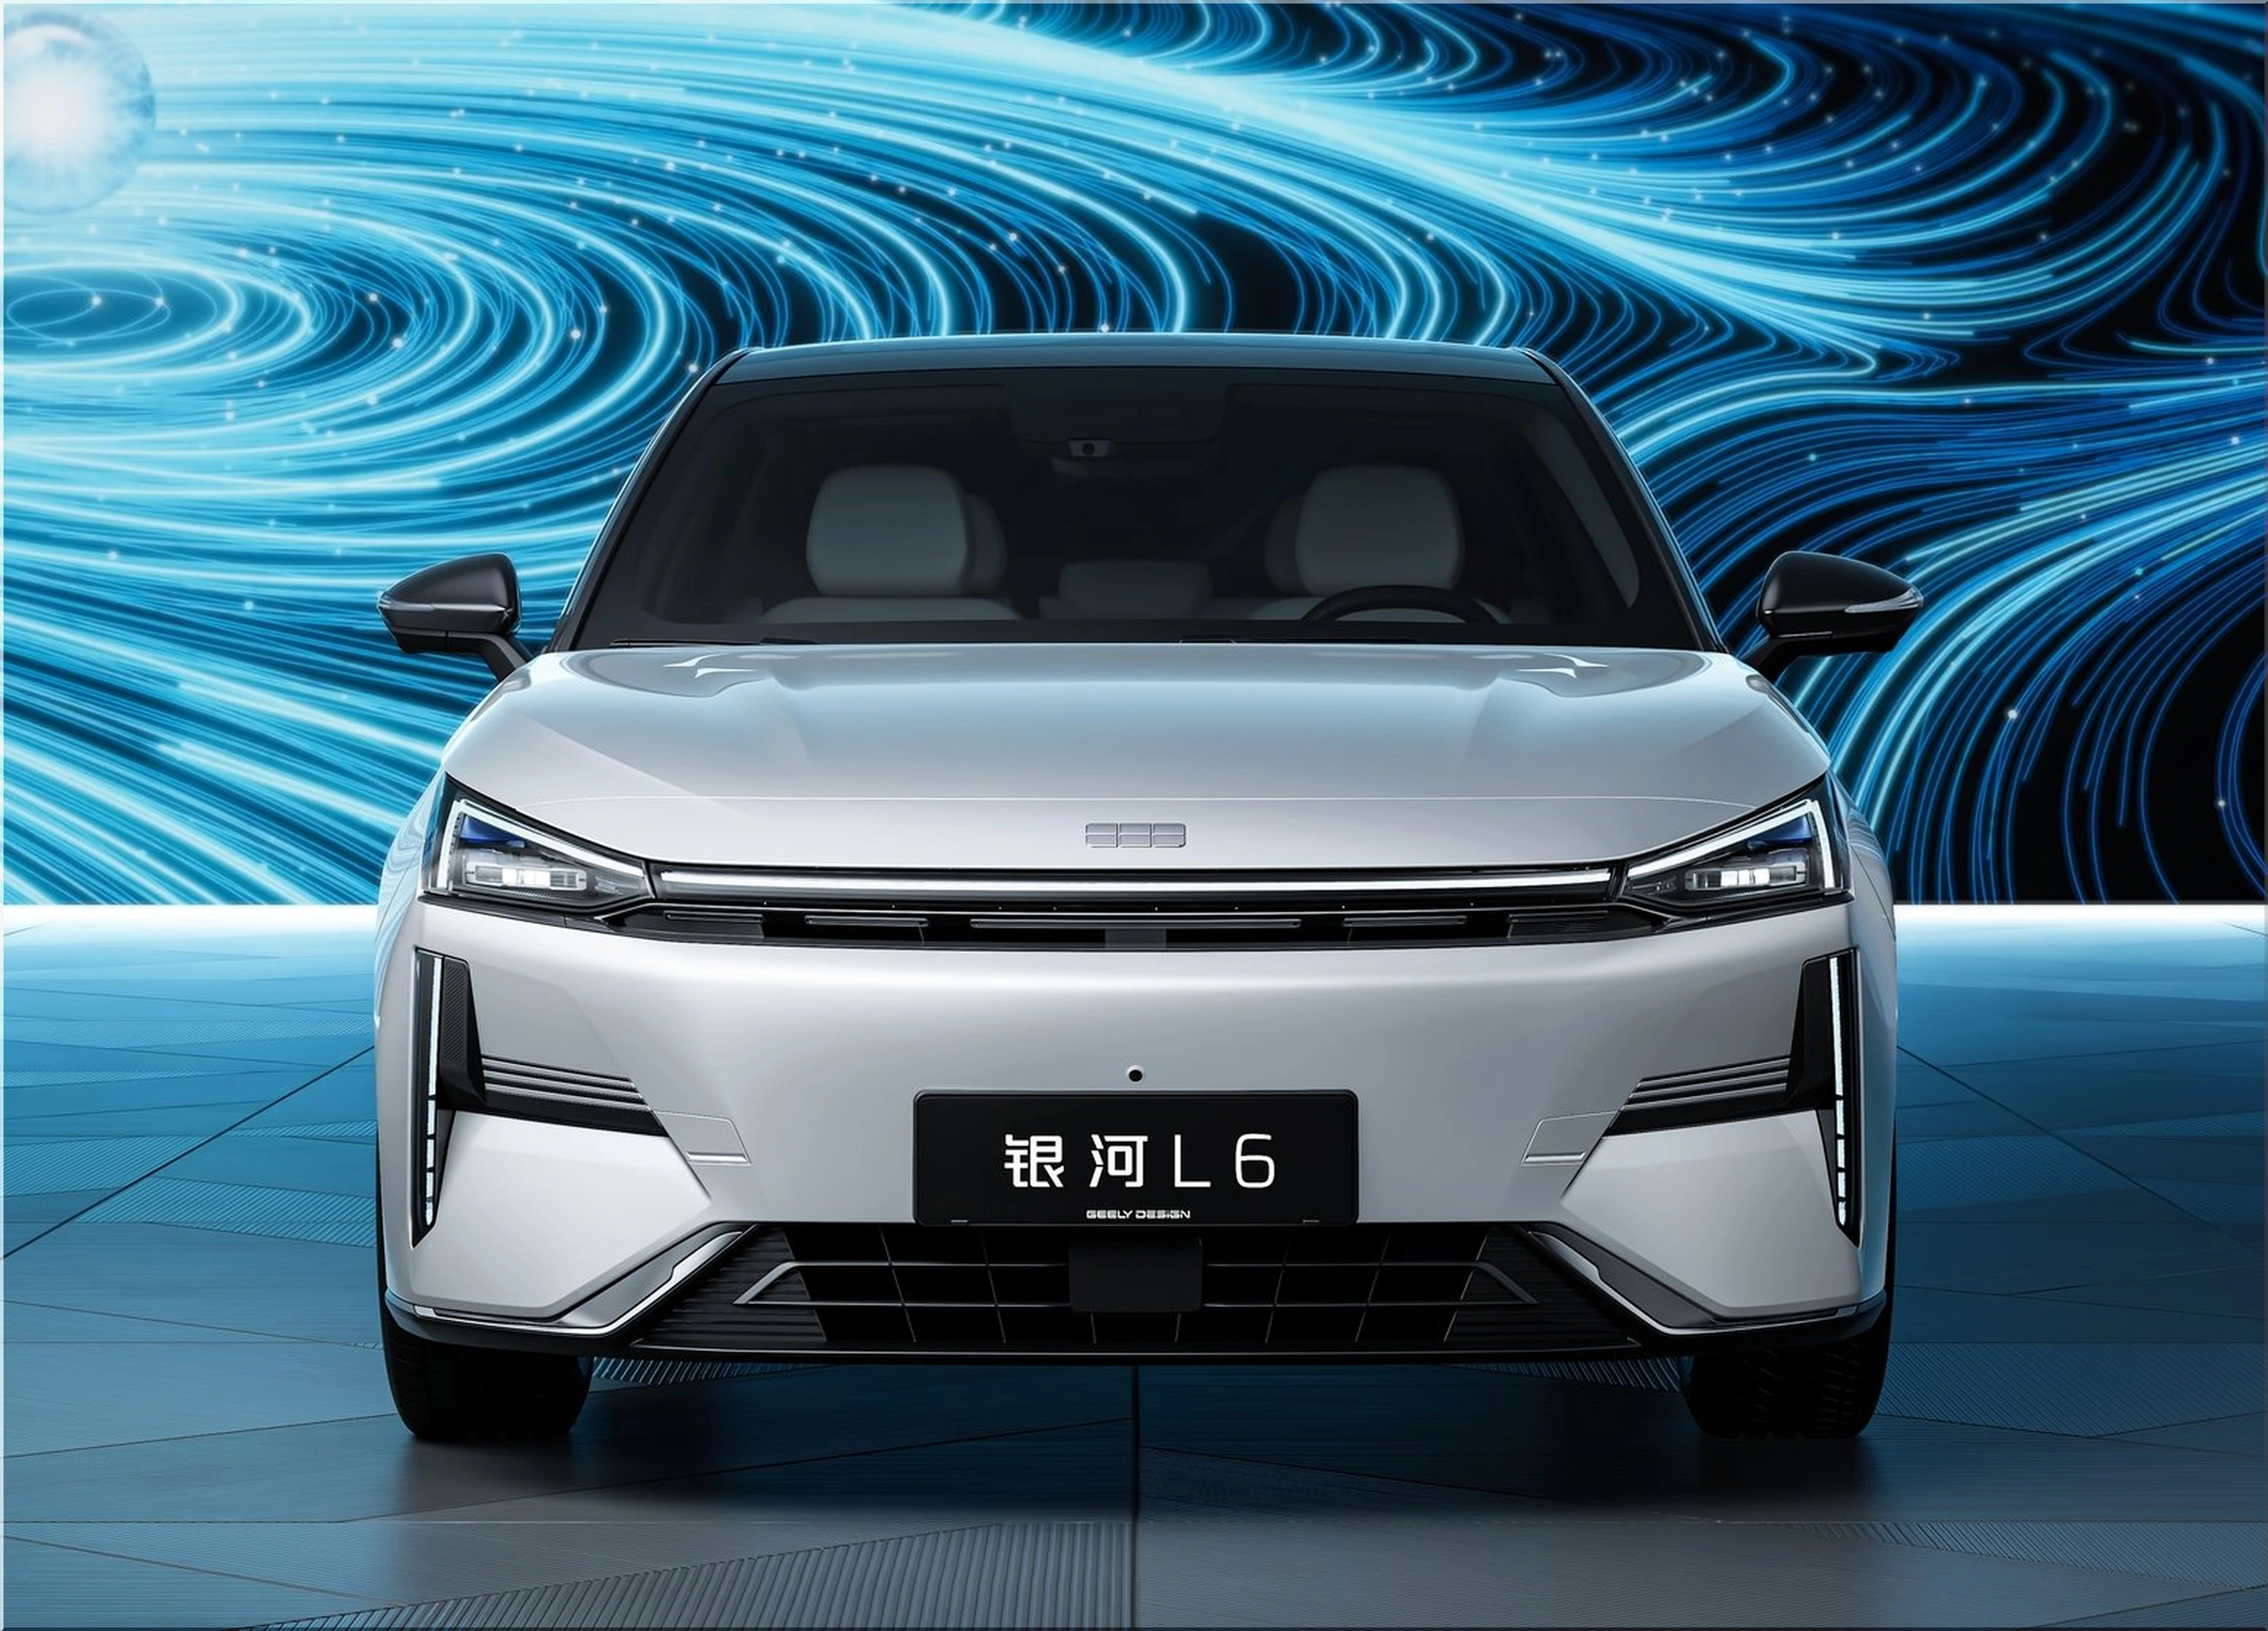 Geely Galaxy L6: The Chinese Sedan with a Cosmic Design and a Smart AI ...